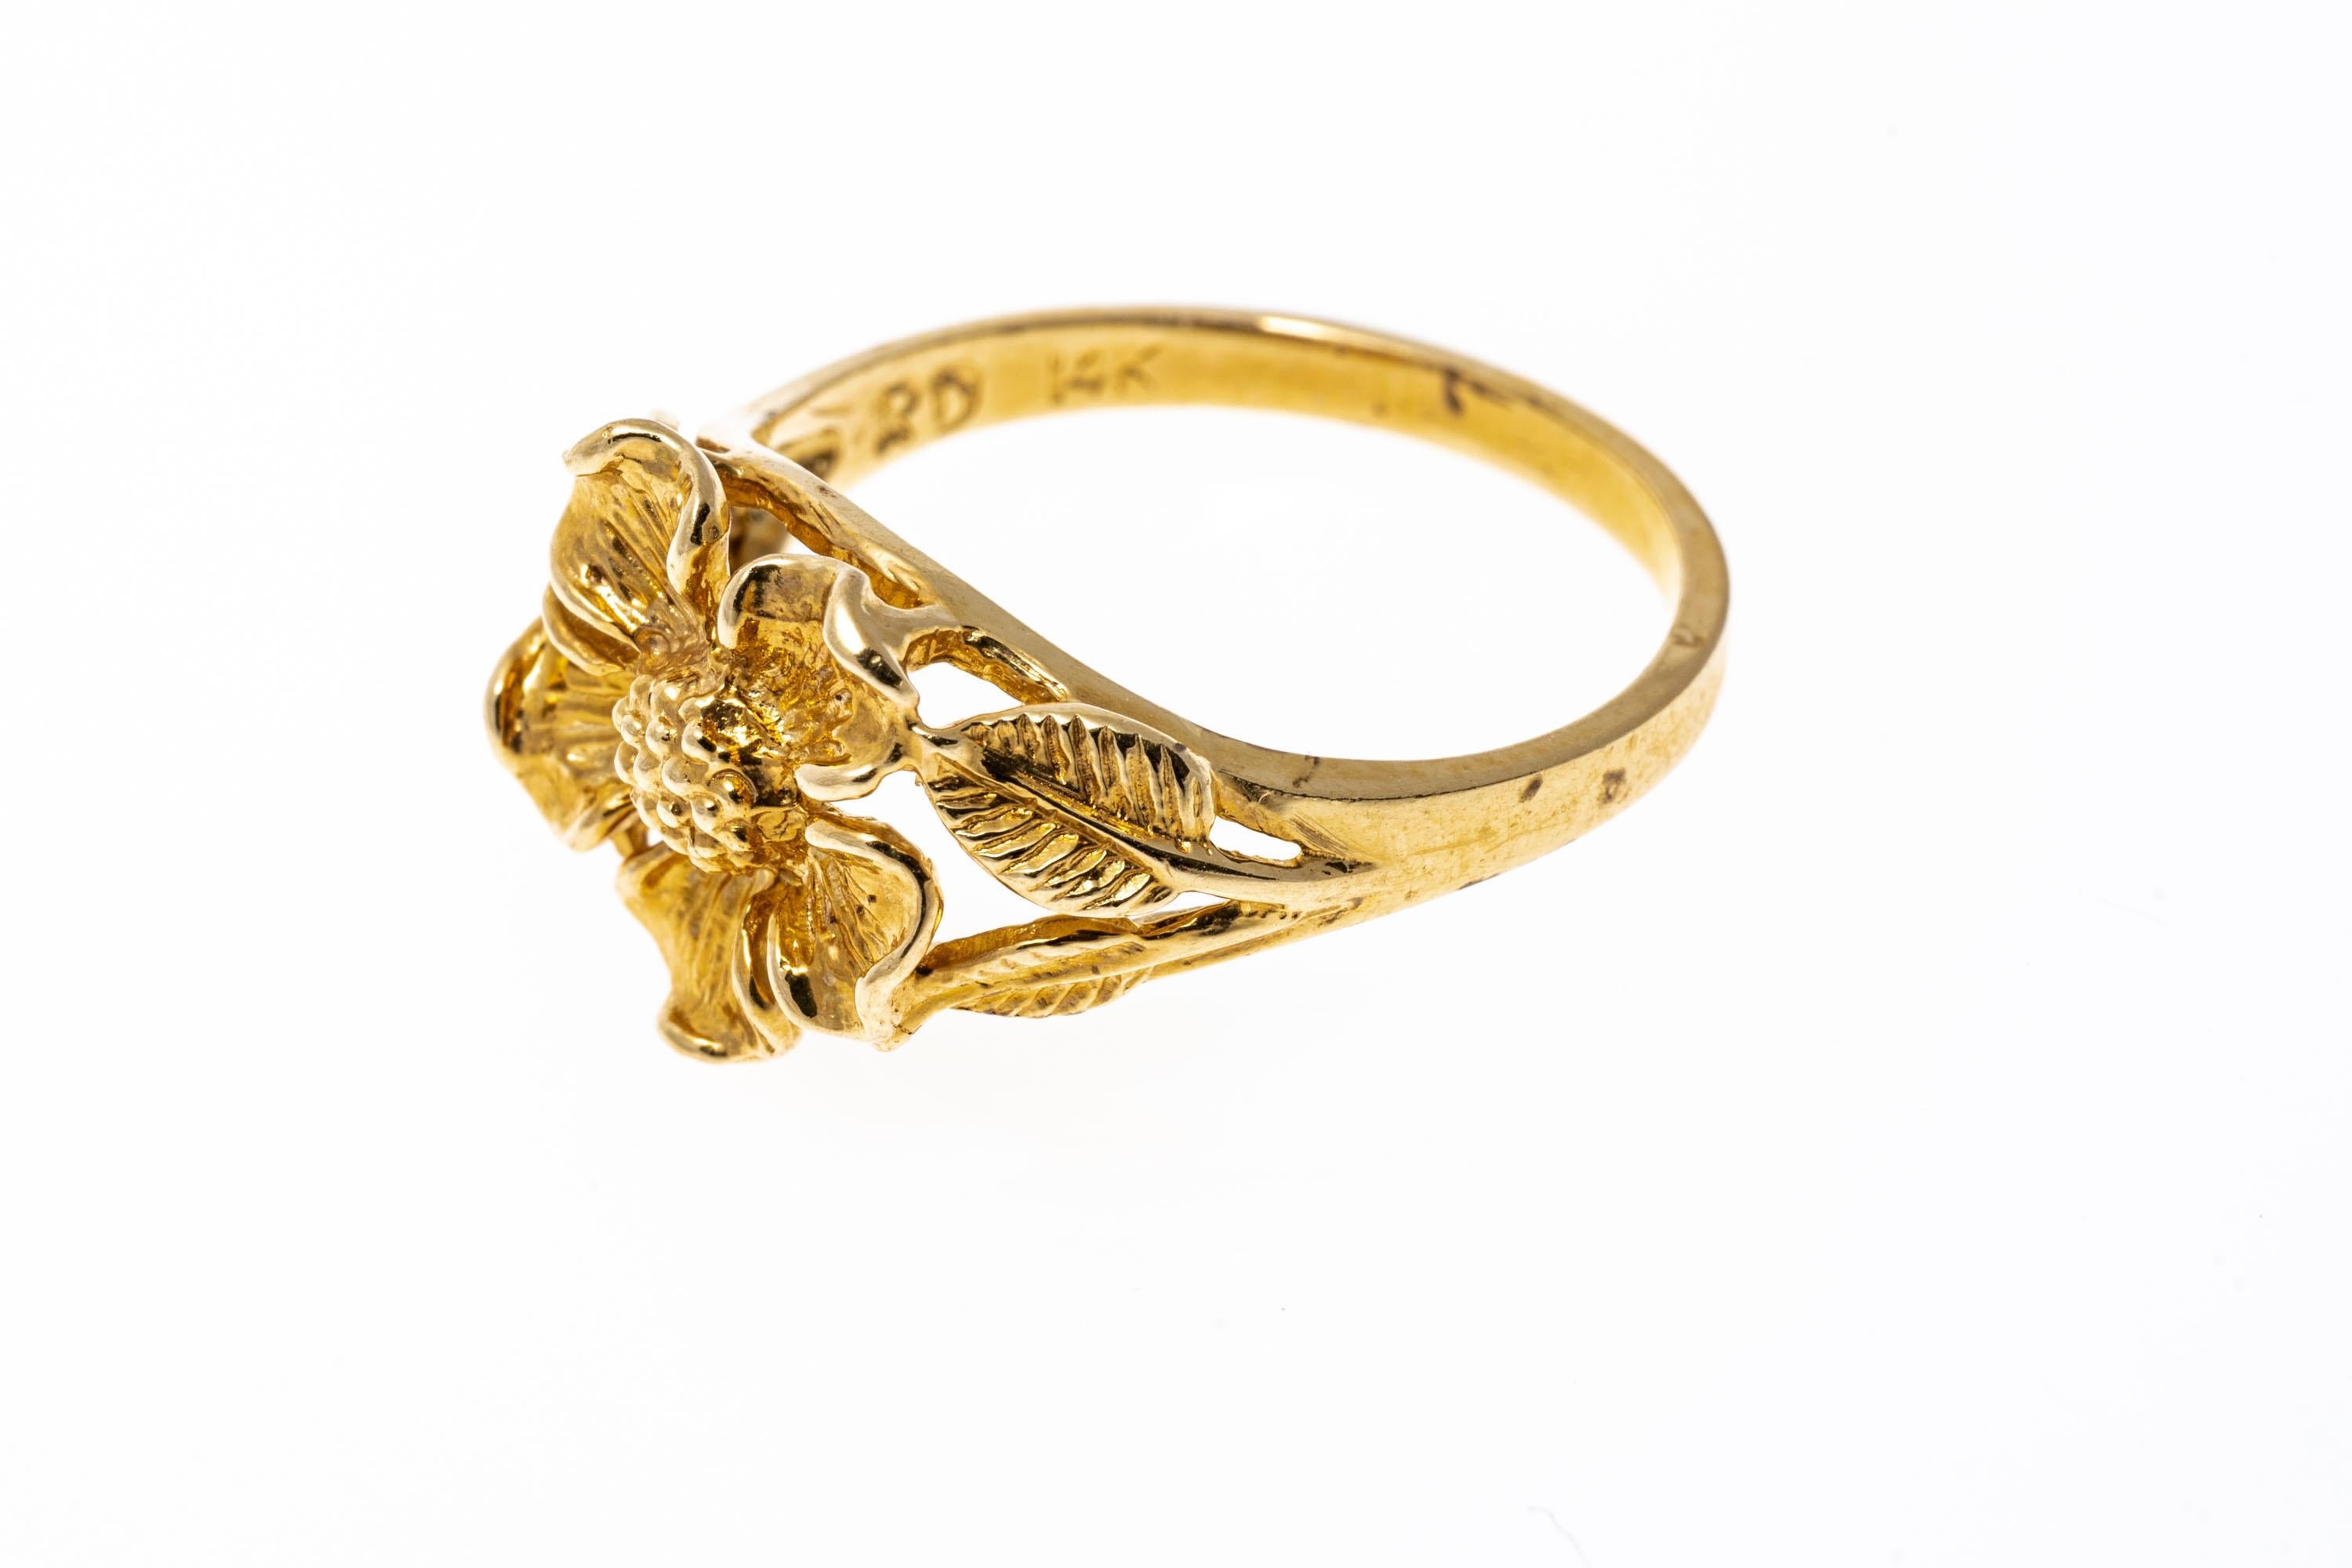 14k yellow gold ring. This pretty ring is a figural five petal flower motif, decorated with leaf patterned split shoulders.
Marks: 14k
Dimensions: 5/8